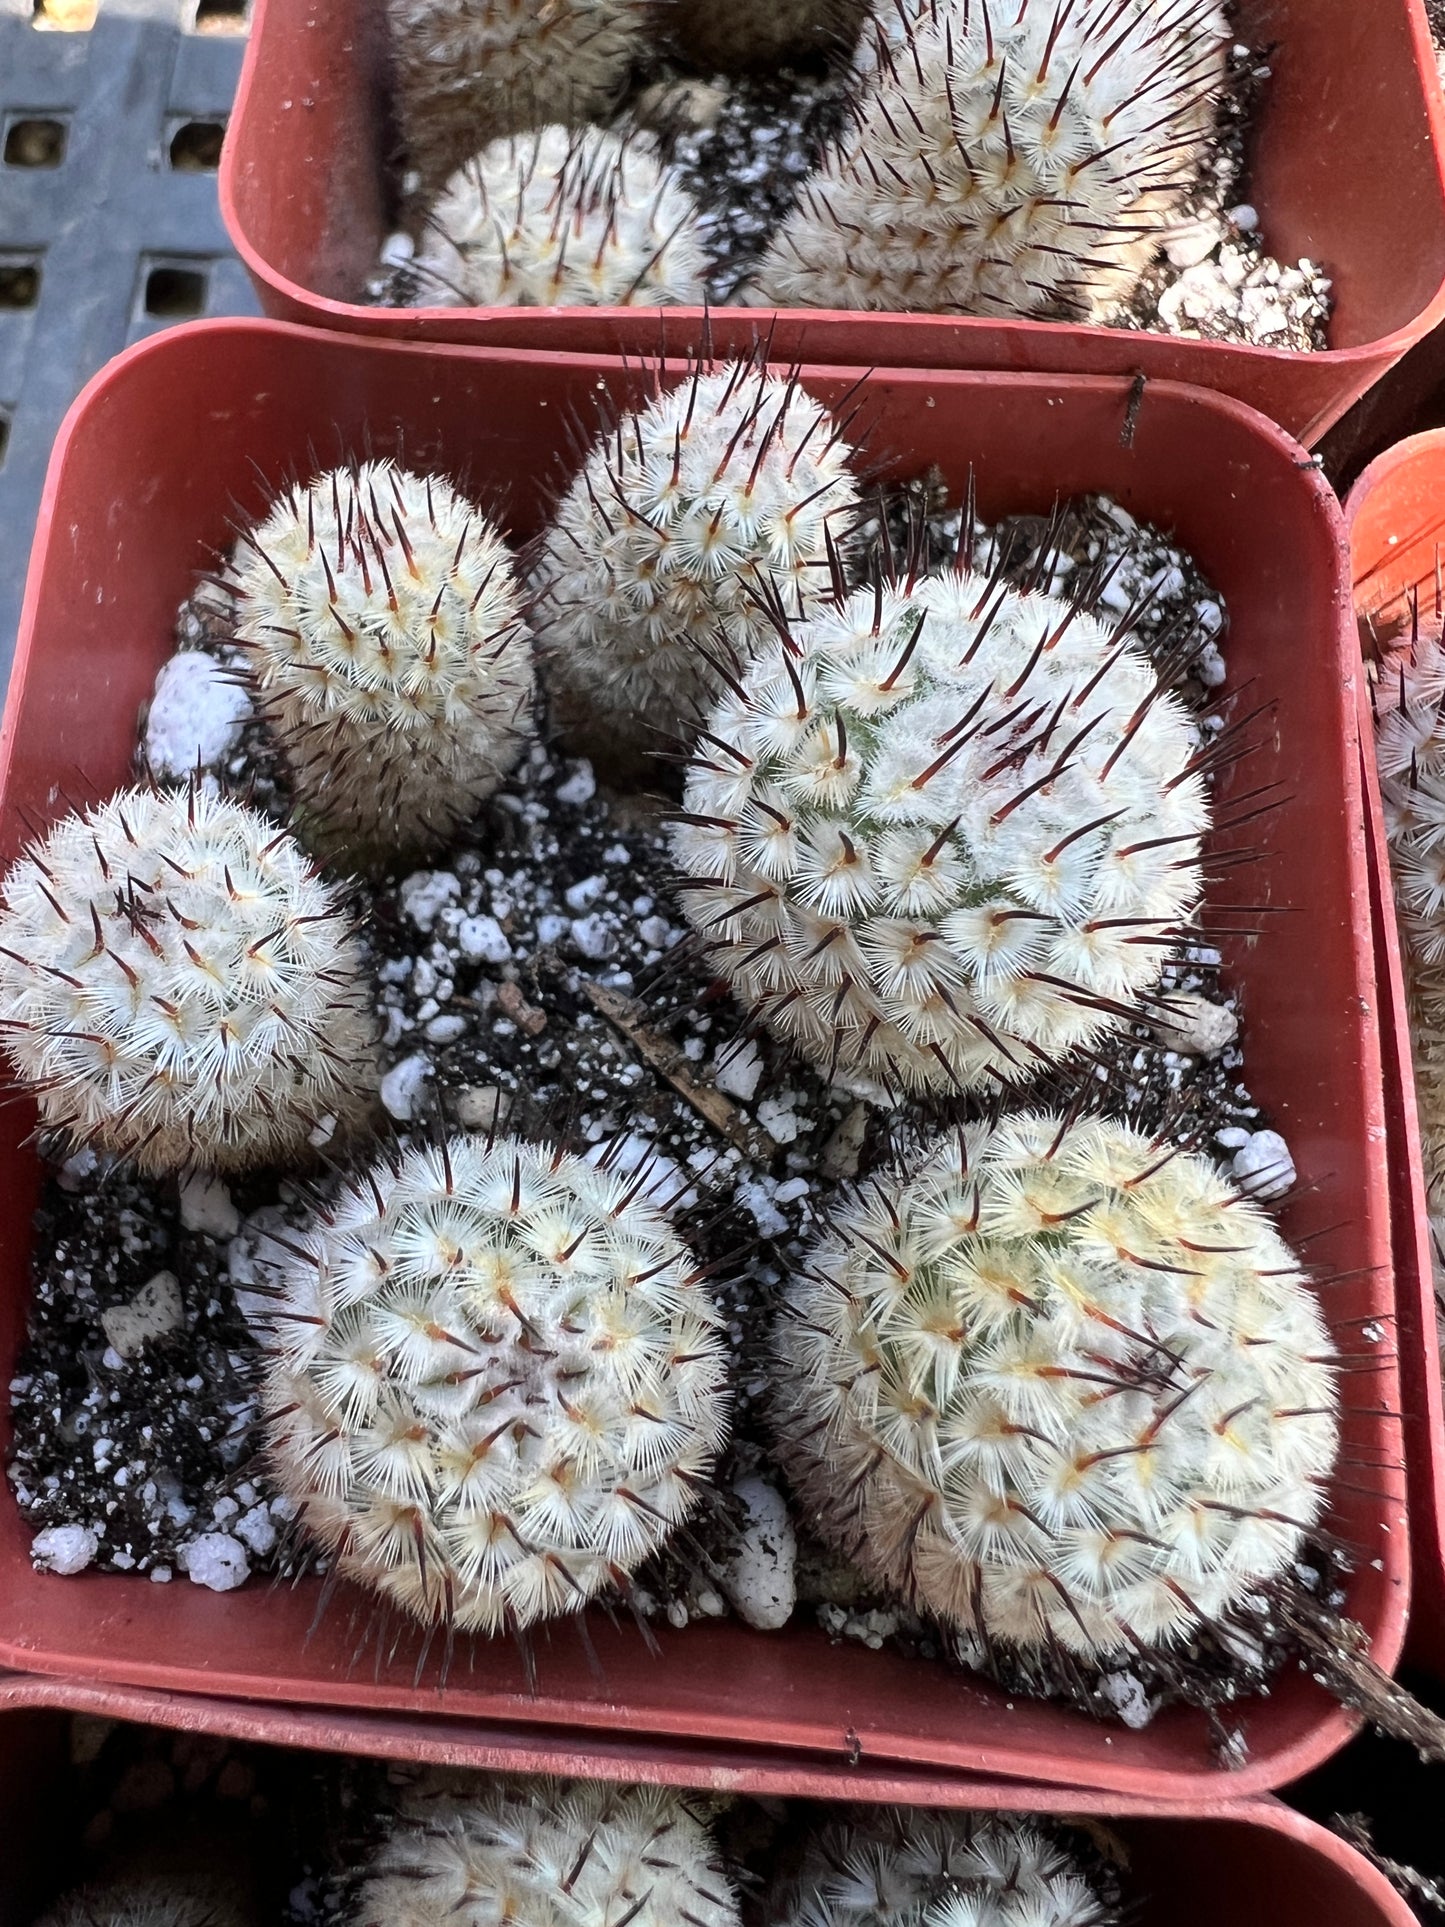 Mammillaria Perezdelarosae v. Andersonii pack of 6 plants for 100$ cheap deal